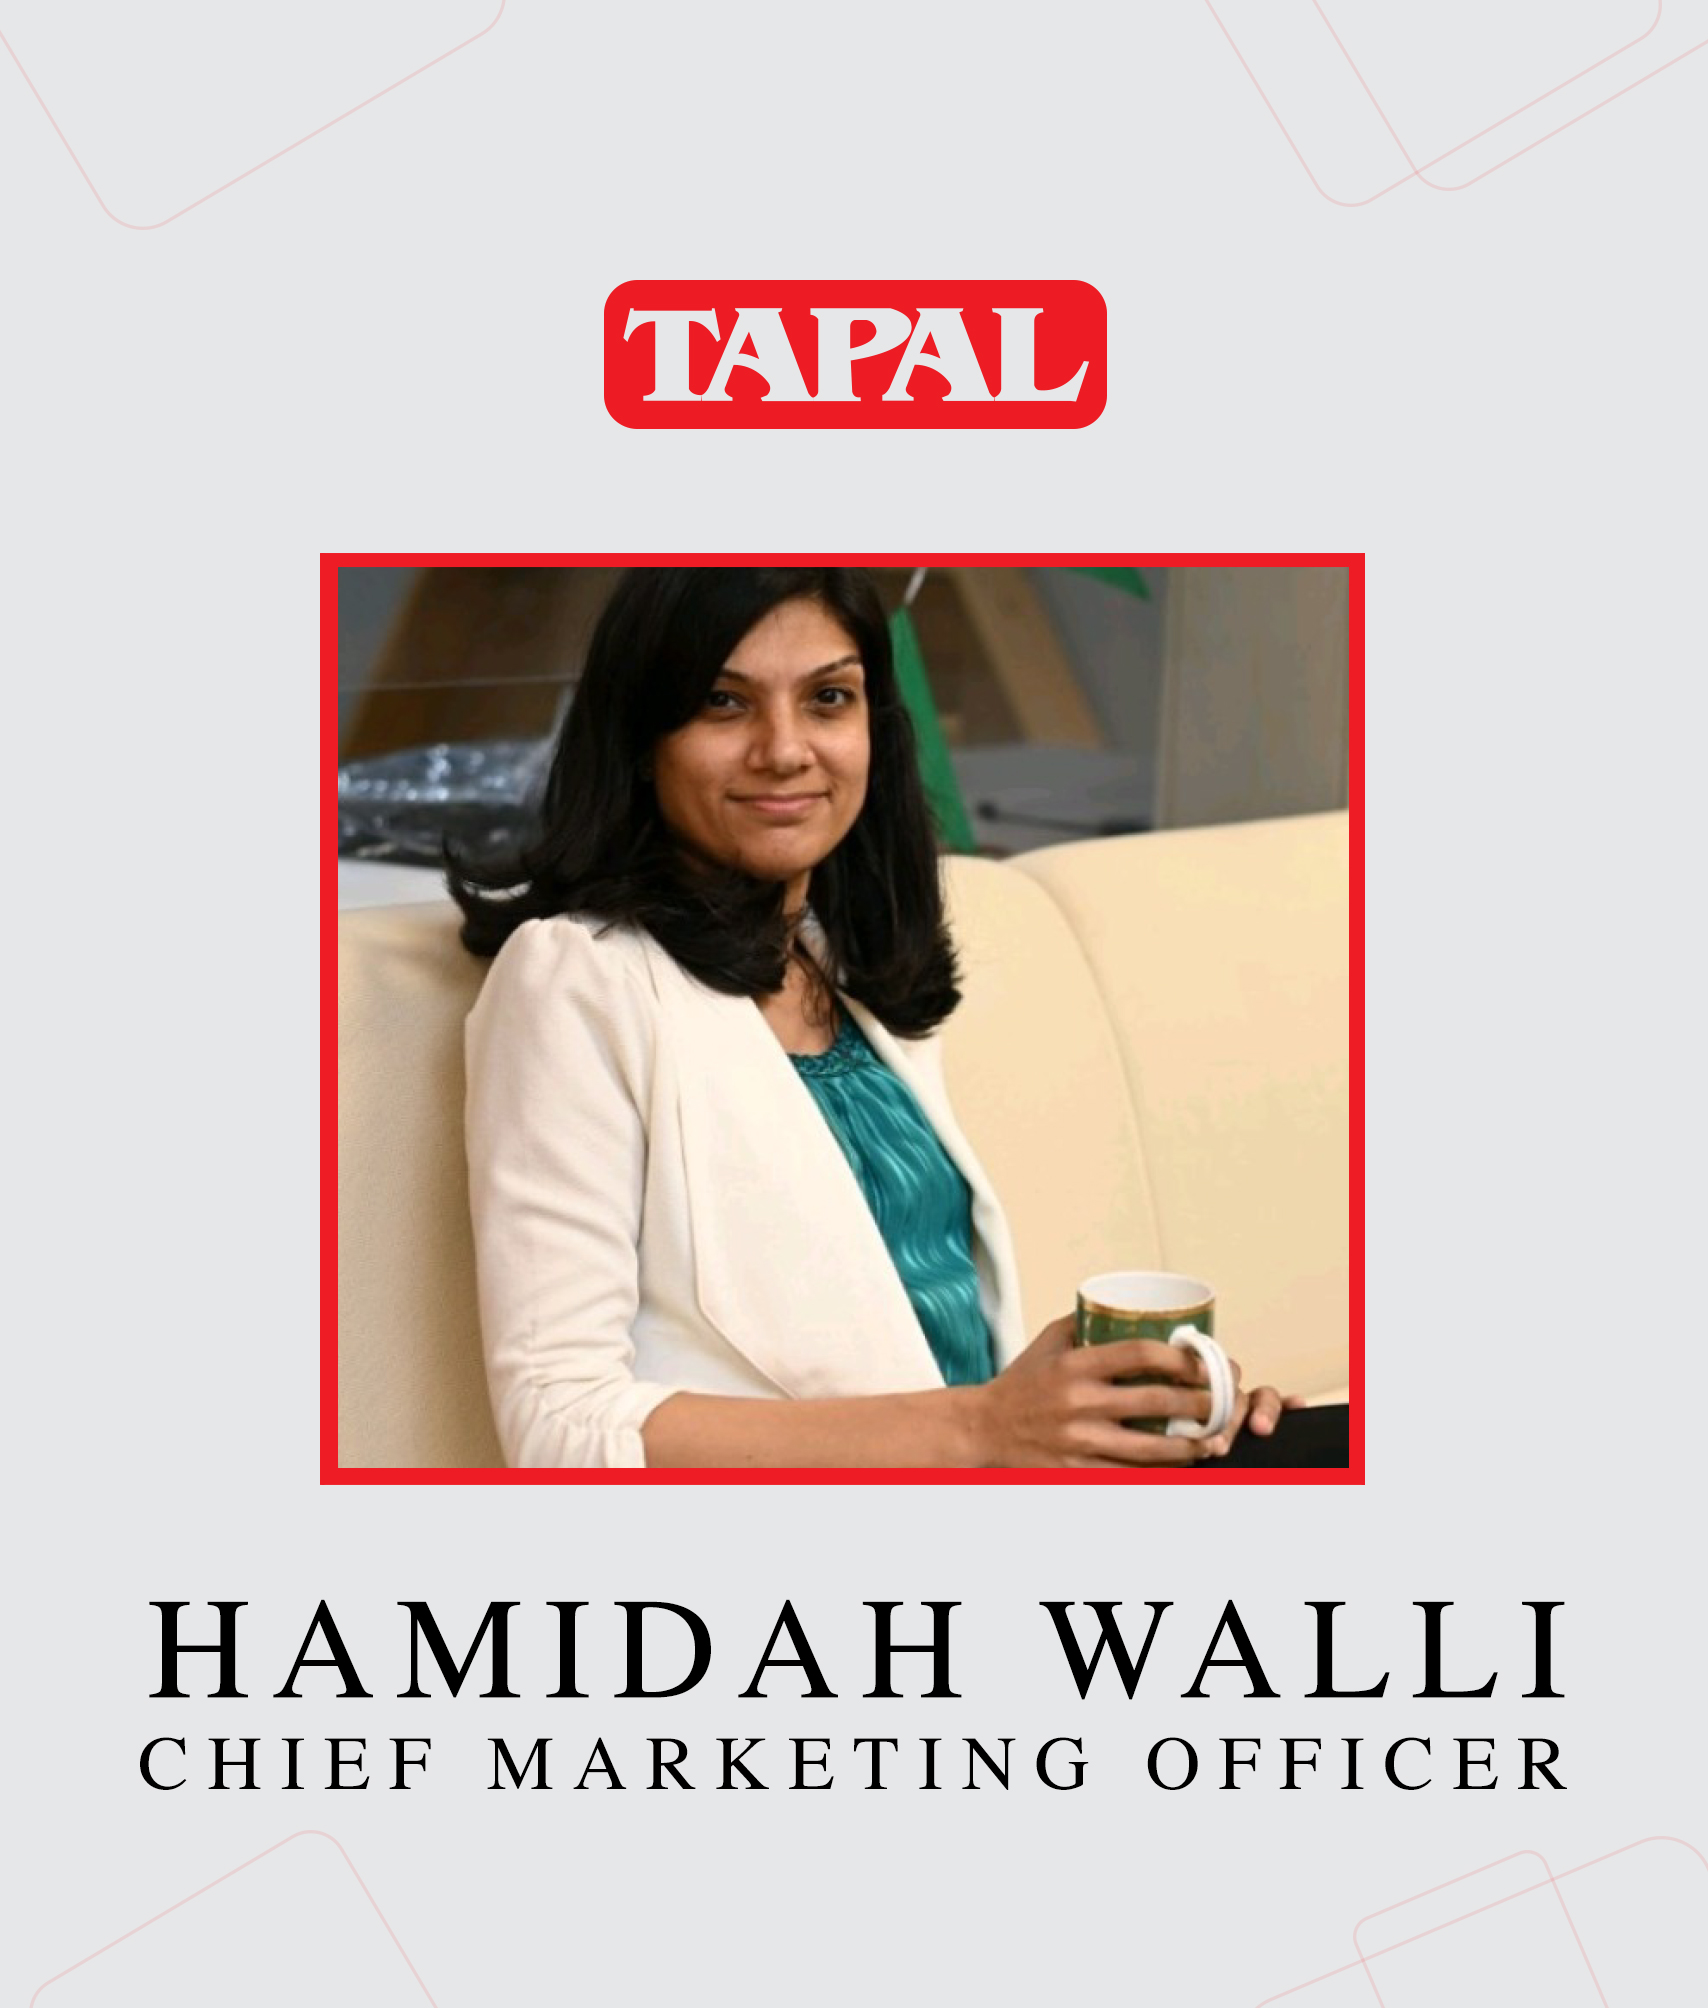 Tapal appoints Hamidah Wali as Chief Marketing Officer